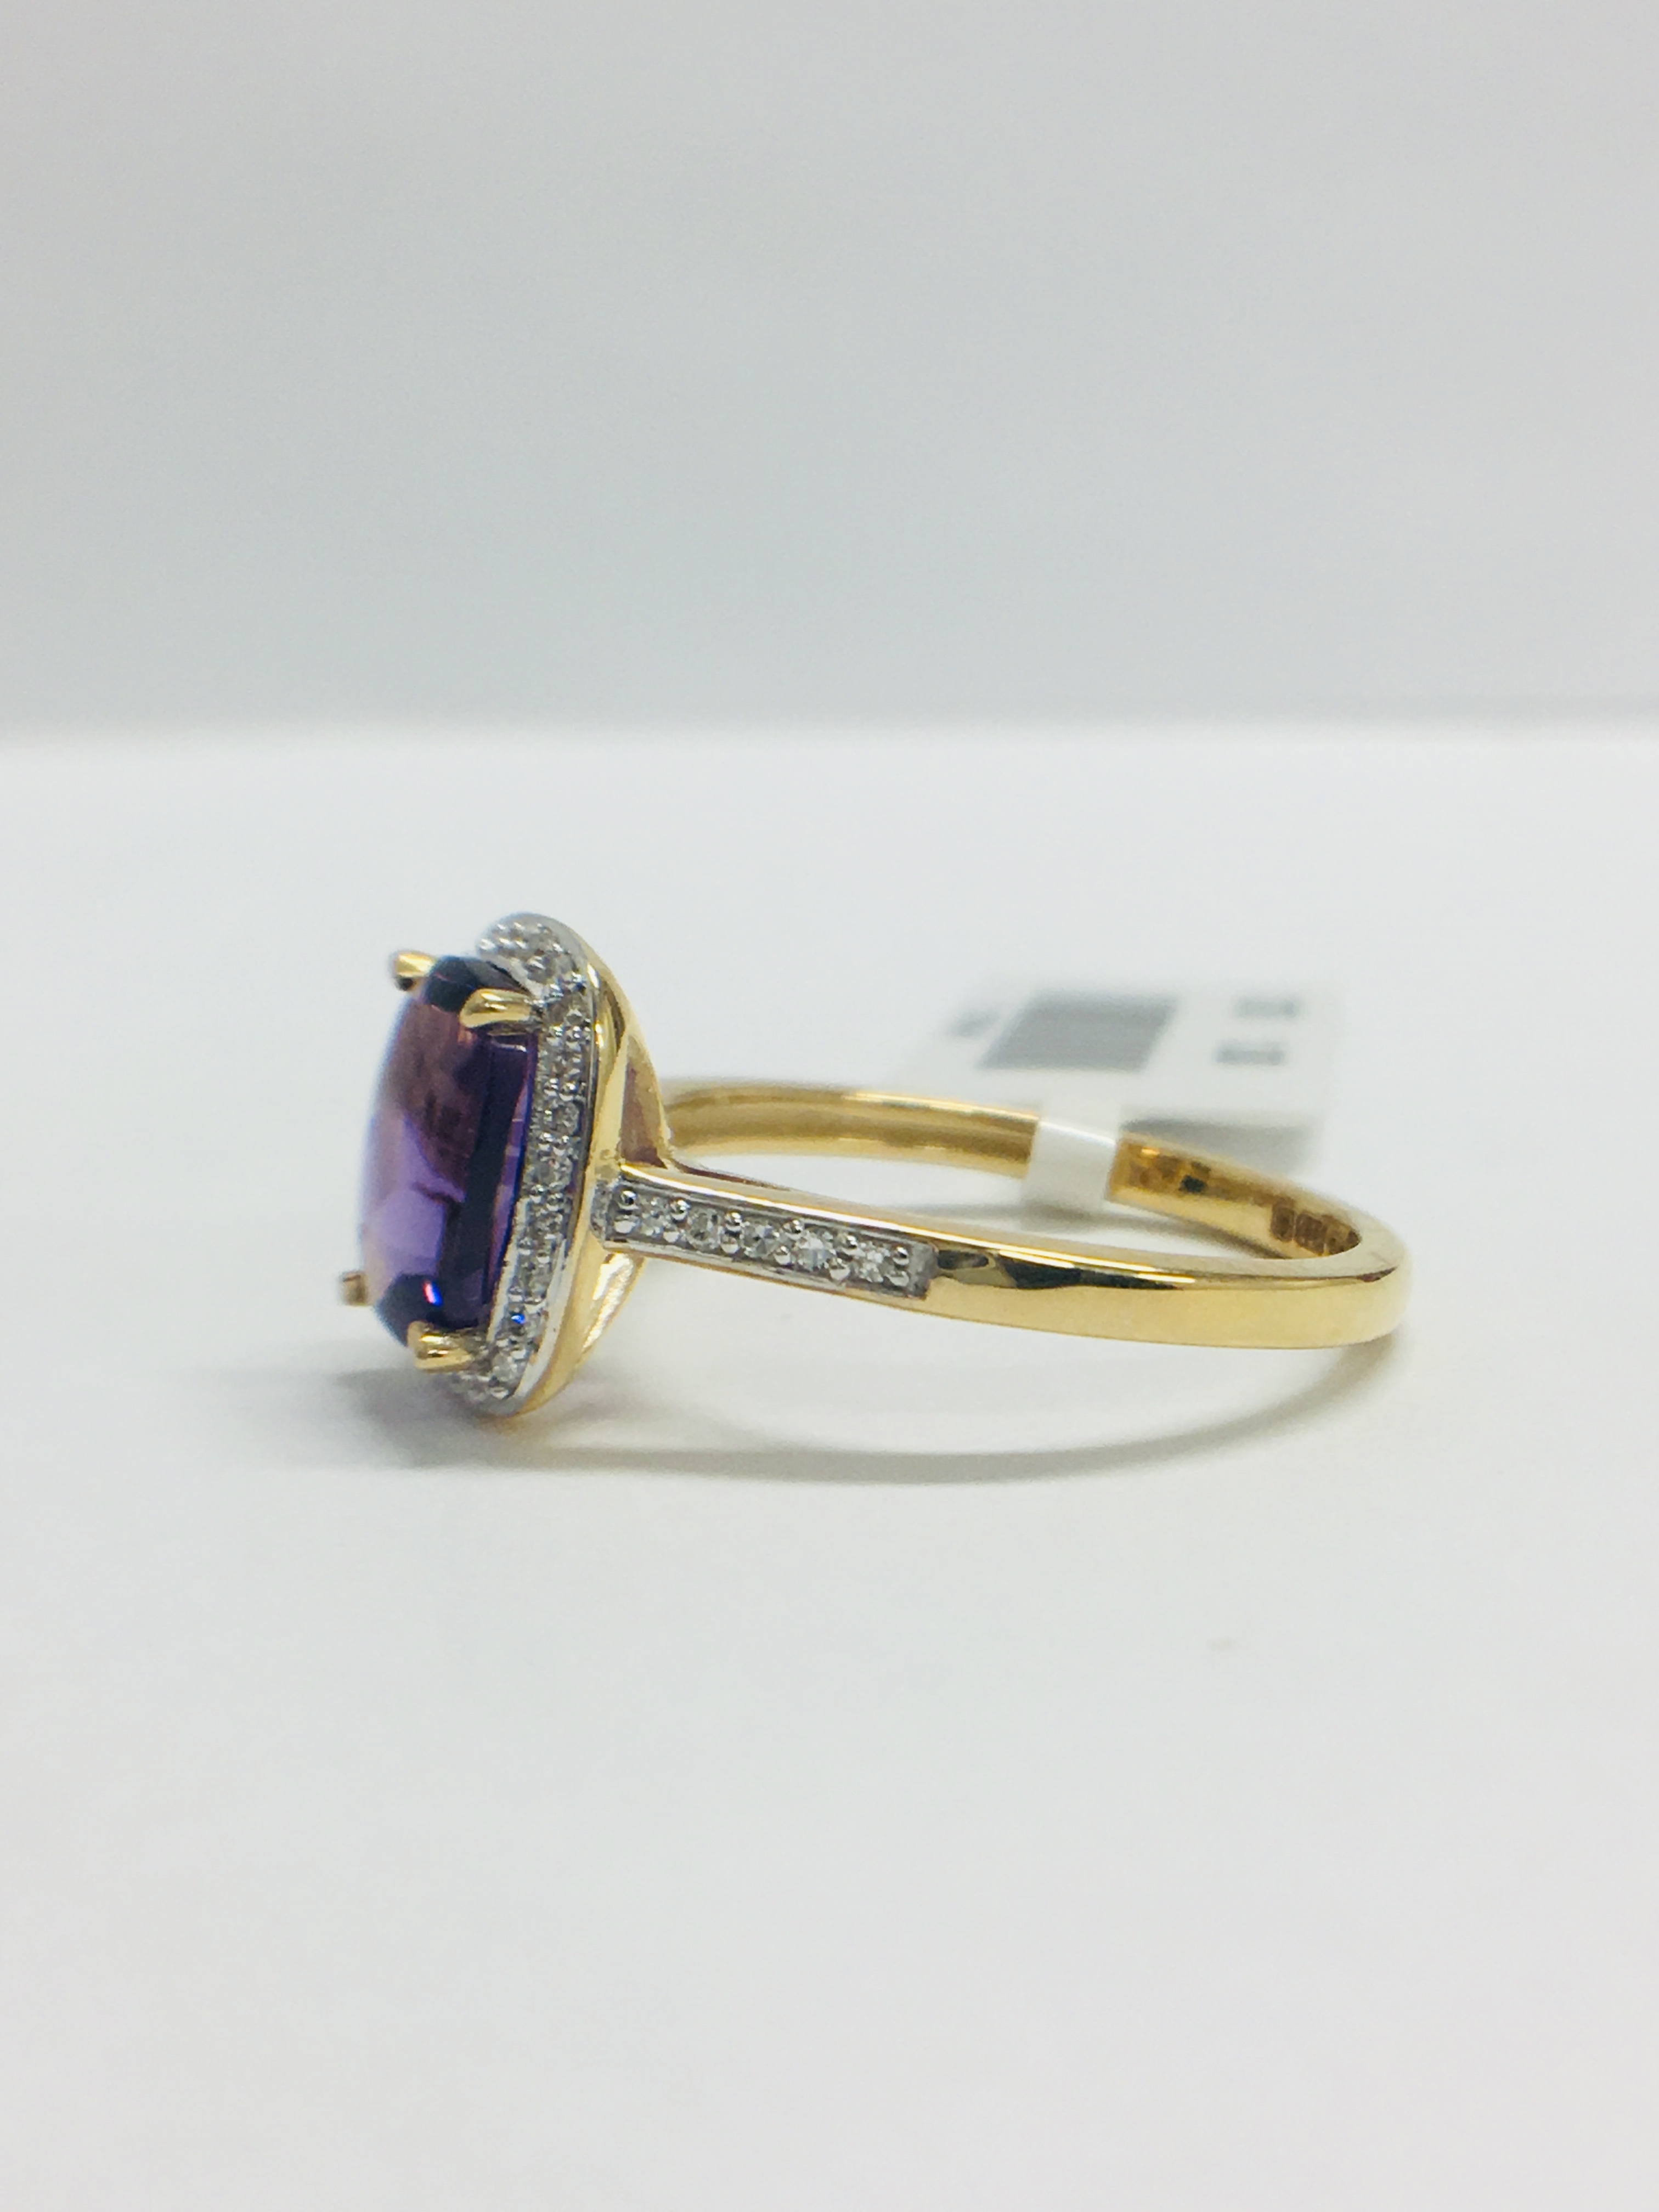 9ct yellow gold Amethyst and diamond ring - Image 3 of 11